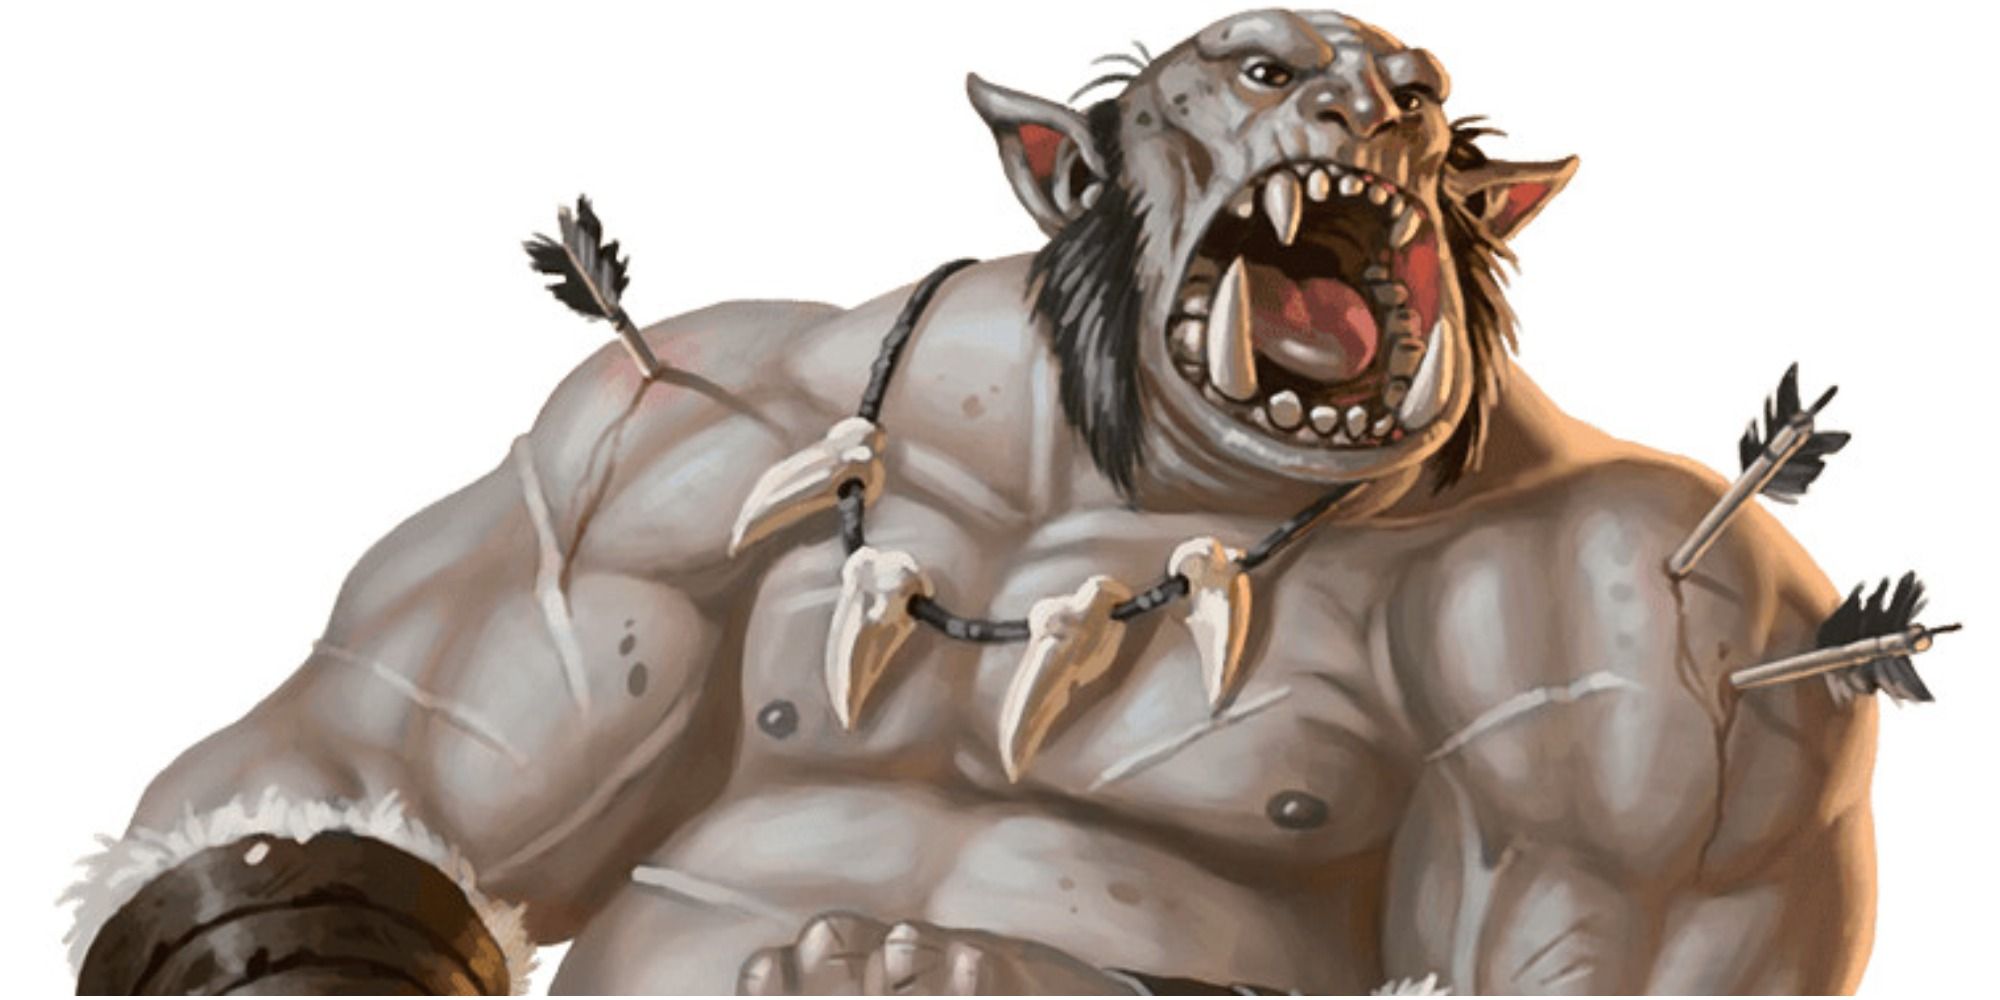 An Ogre Battering Ram from Dungeons & Dragons